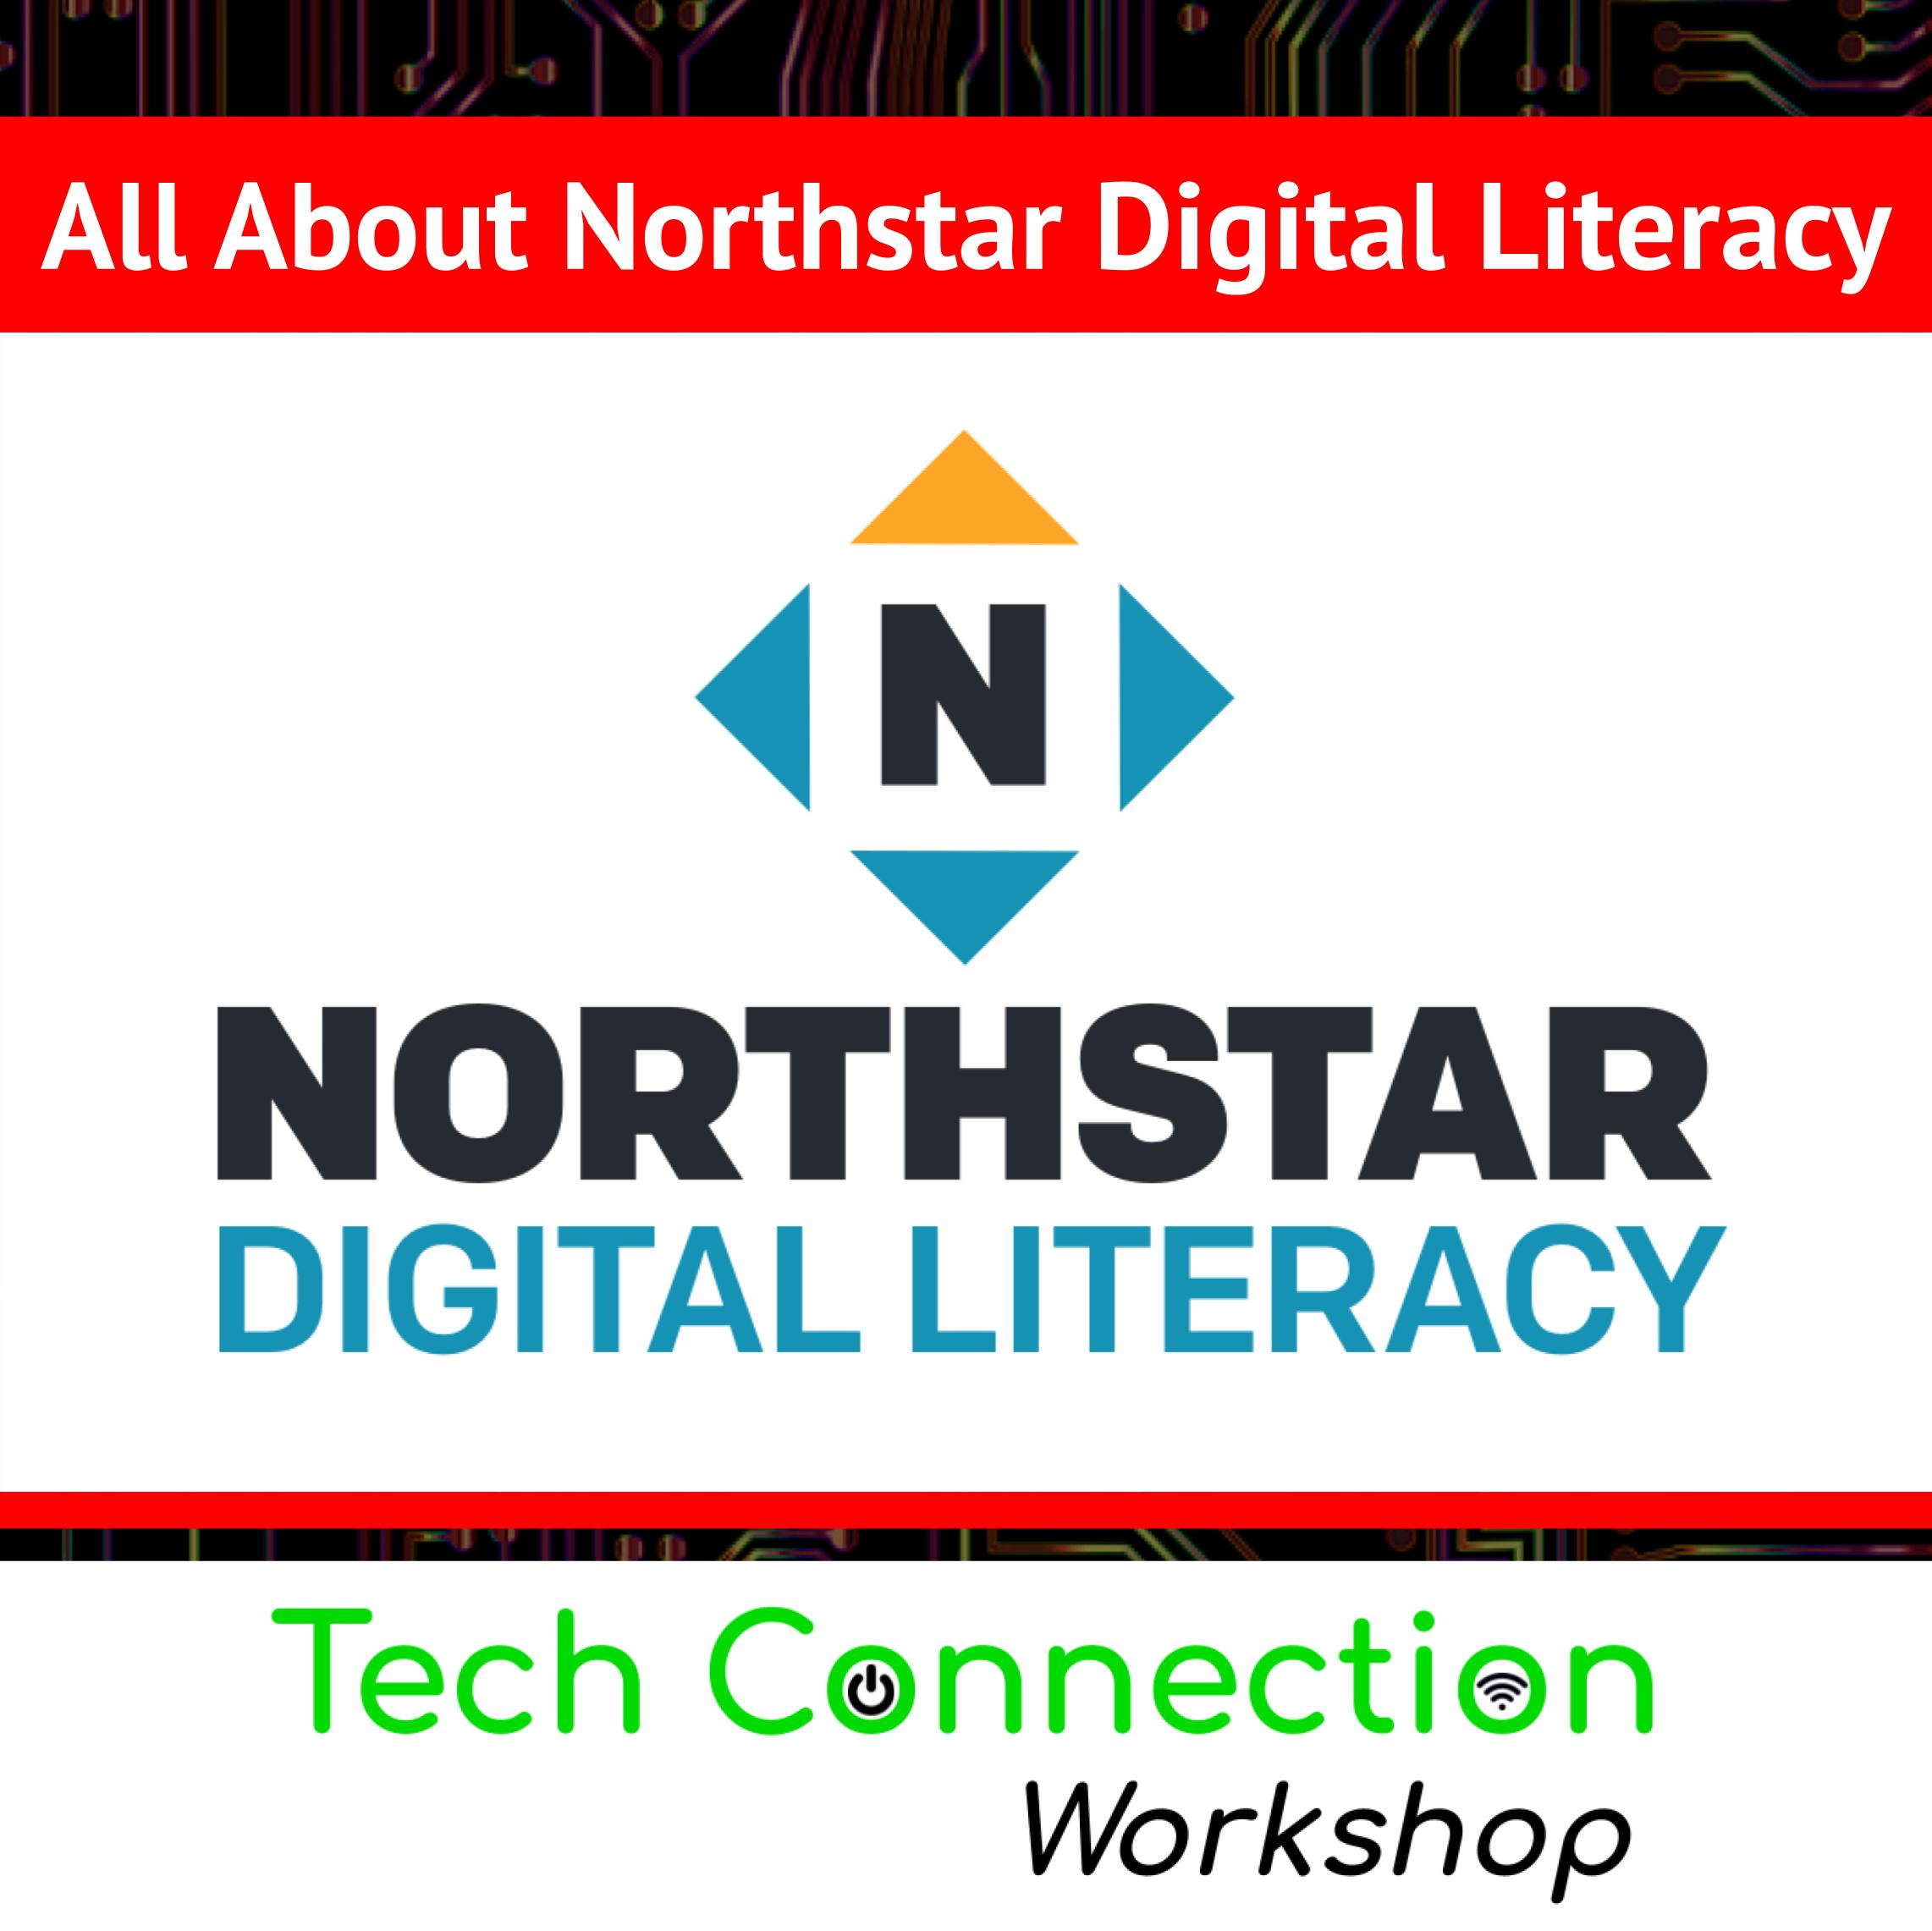 Tech Connection Workshop: All About Northstar Digital Literacy